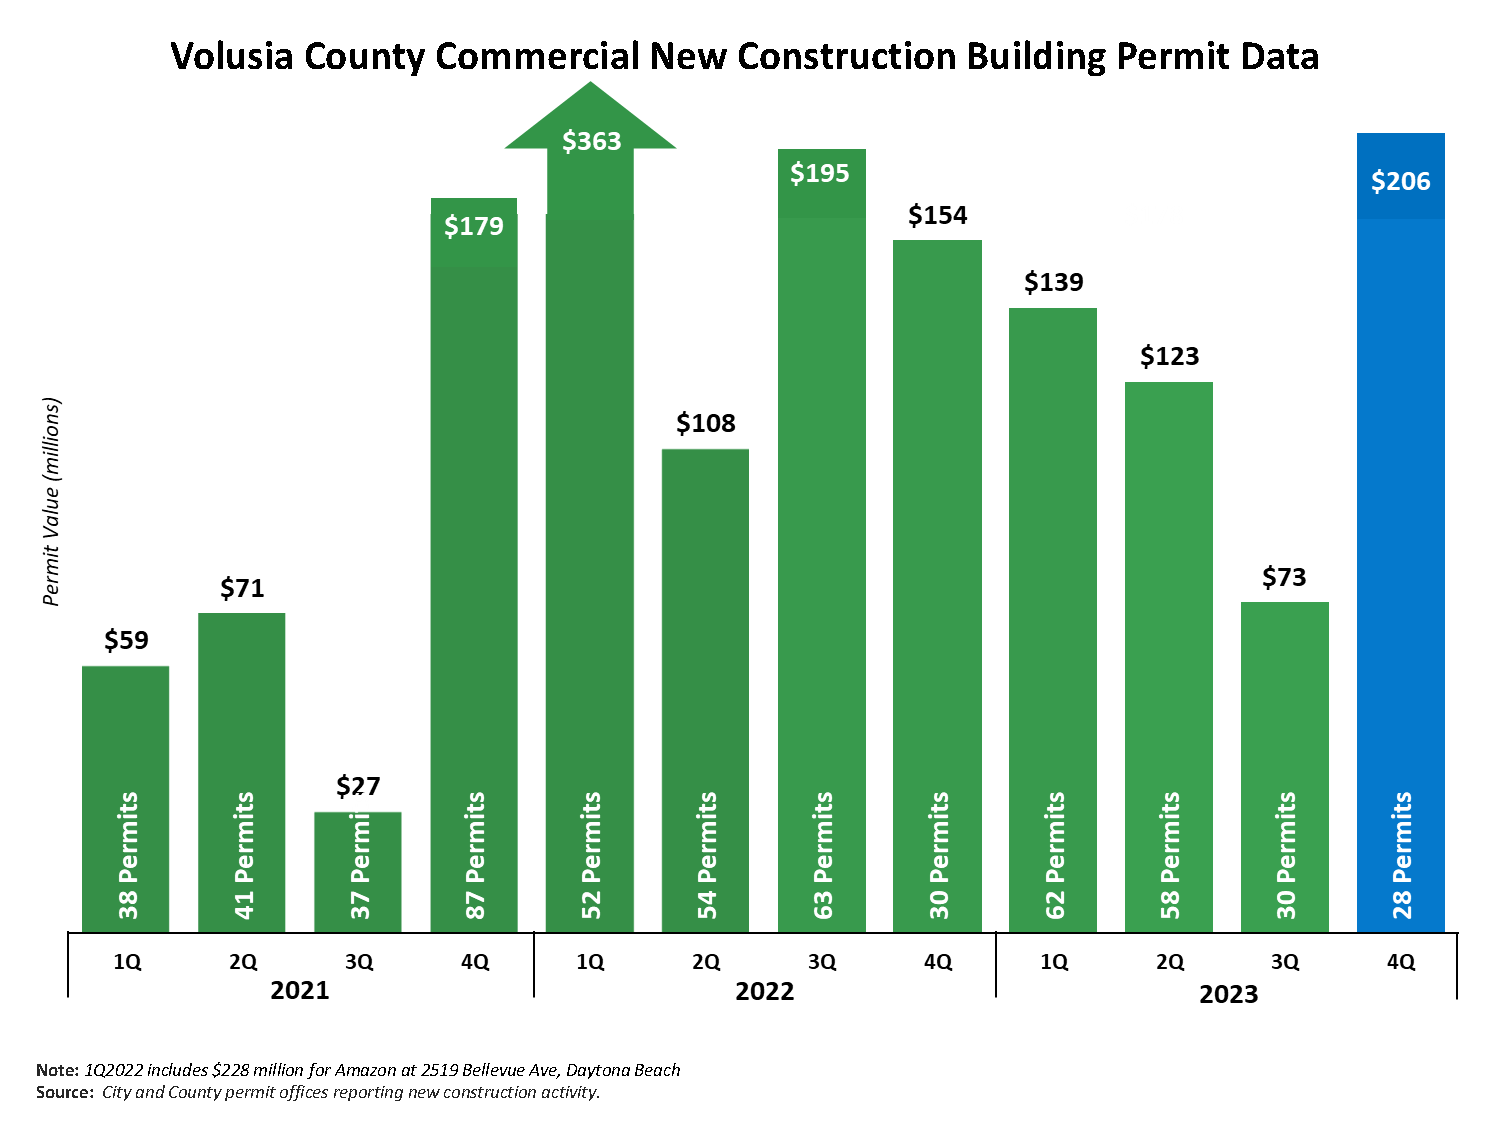 This chart shows a 3-year history by quarter of new commercial construction building permits in Volusia County. There were 31 commercial building permits issued in the 3rd quarter 2023 for a value of $75 million. This brings the year-to-date total to 151 permits with a value of $337 million. In 2022, there was a total of 199 permits and a value of $820 million. Total permits for 2021 were 203 for a value of $336 million.